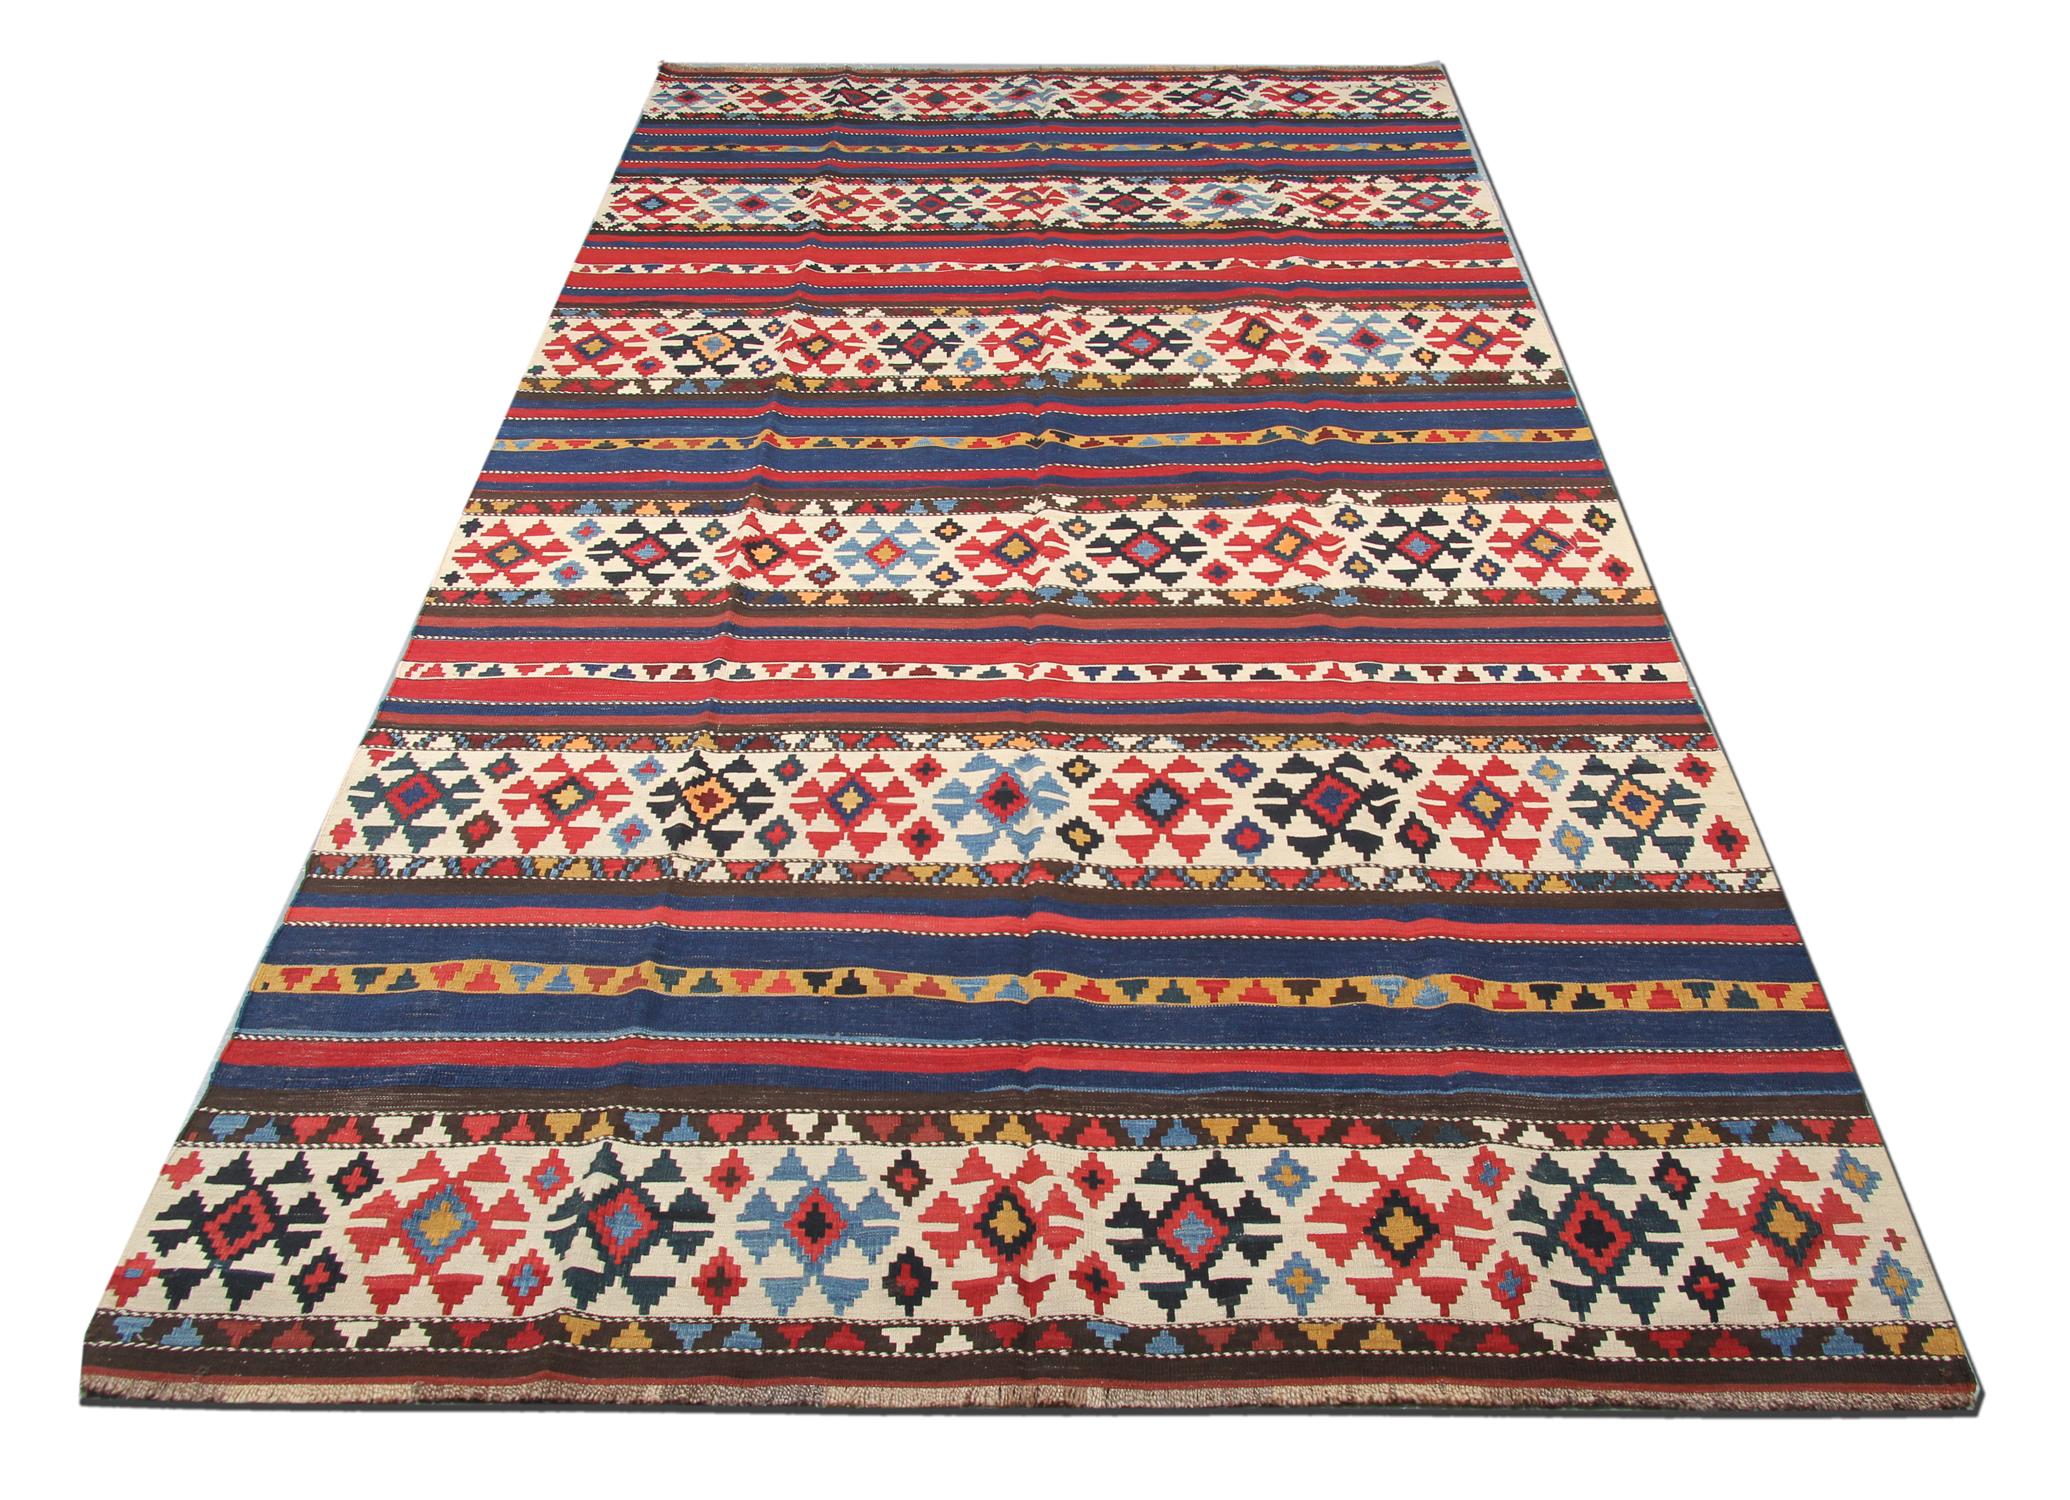 This vintage Caucasian Shirvan rug was hand-woven with a fantastic geometric stripe design in the 1940s. The stripe pattern has been woven in red and blue accents and features ivory fields with geometric patterns woven in-between the simple stripe